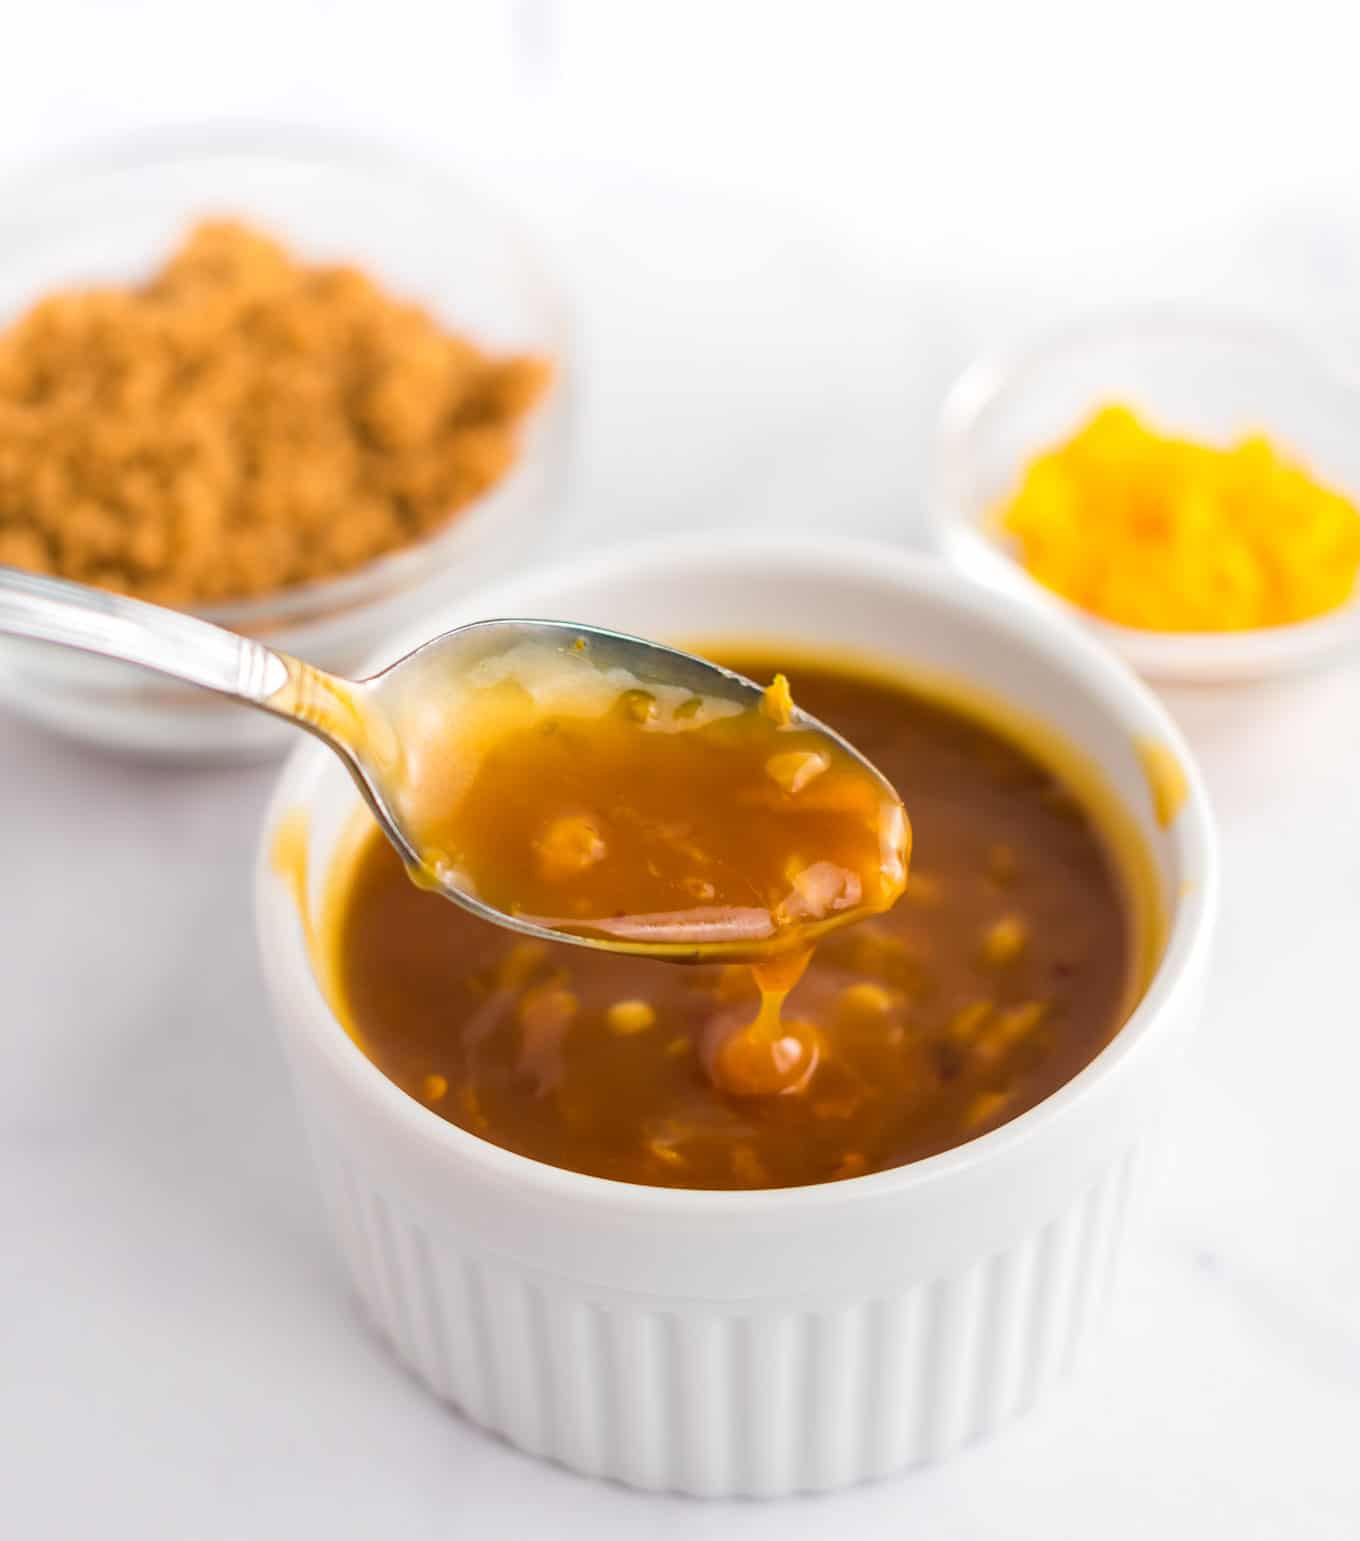 a spoon dipping into orange sauce